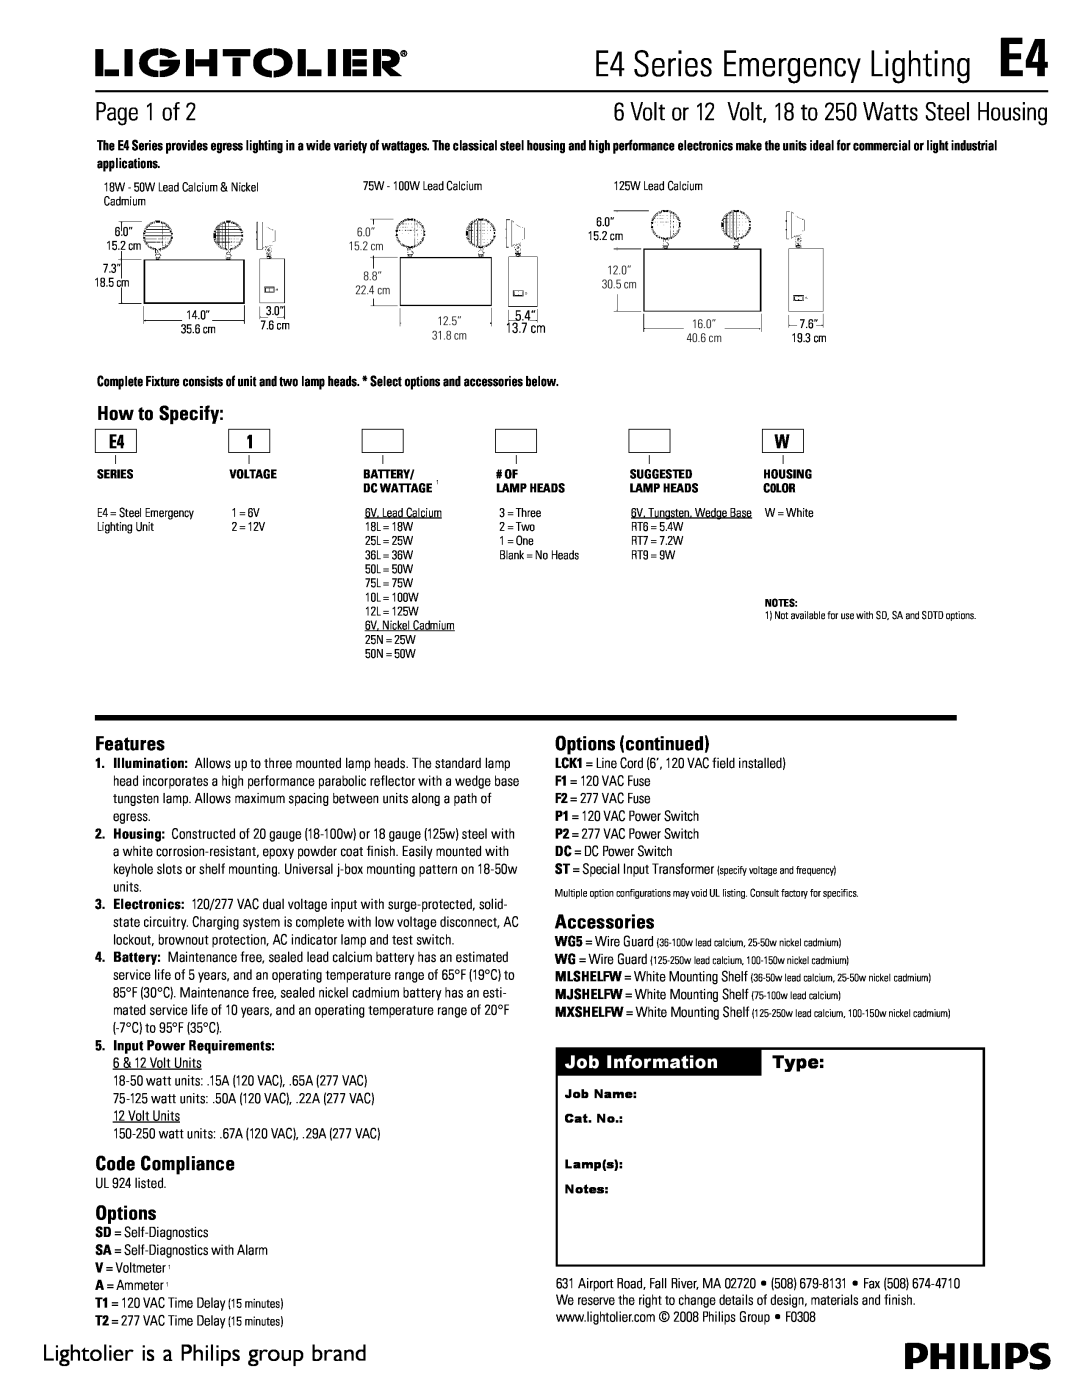 Lightolier E4 Series manual Page 1 of, Lightolier is a Philips group brand, Features, Code Compliance, Options 